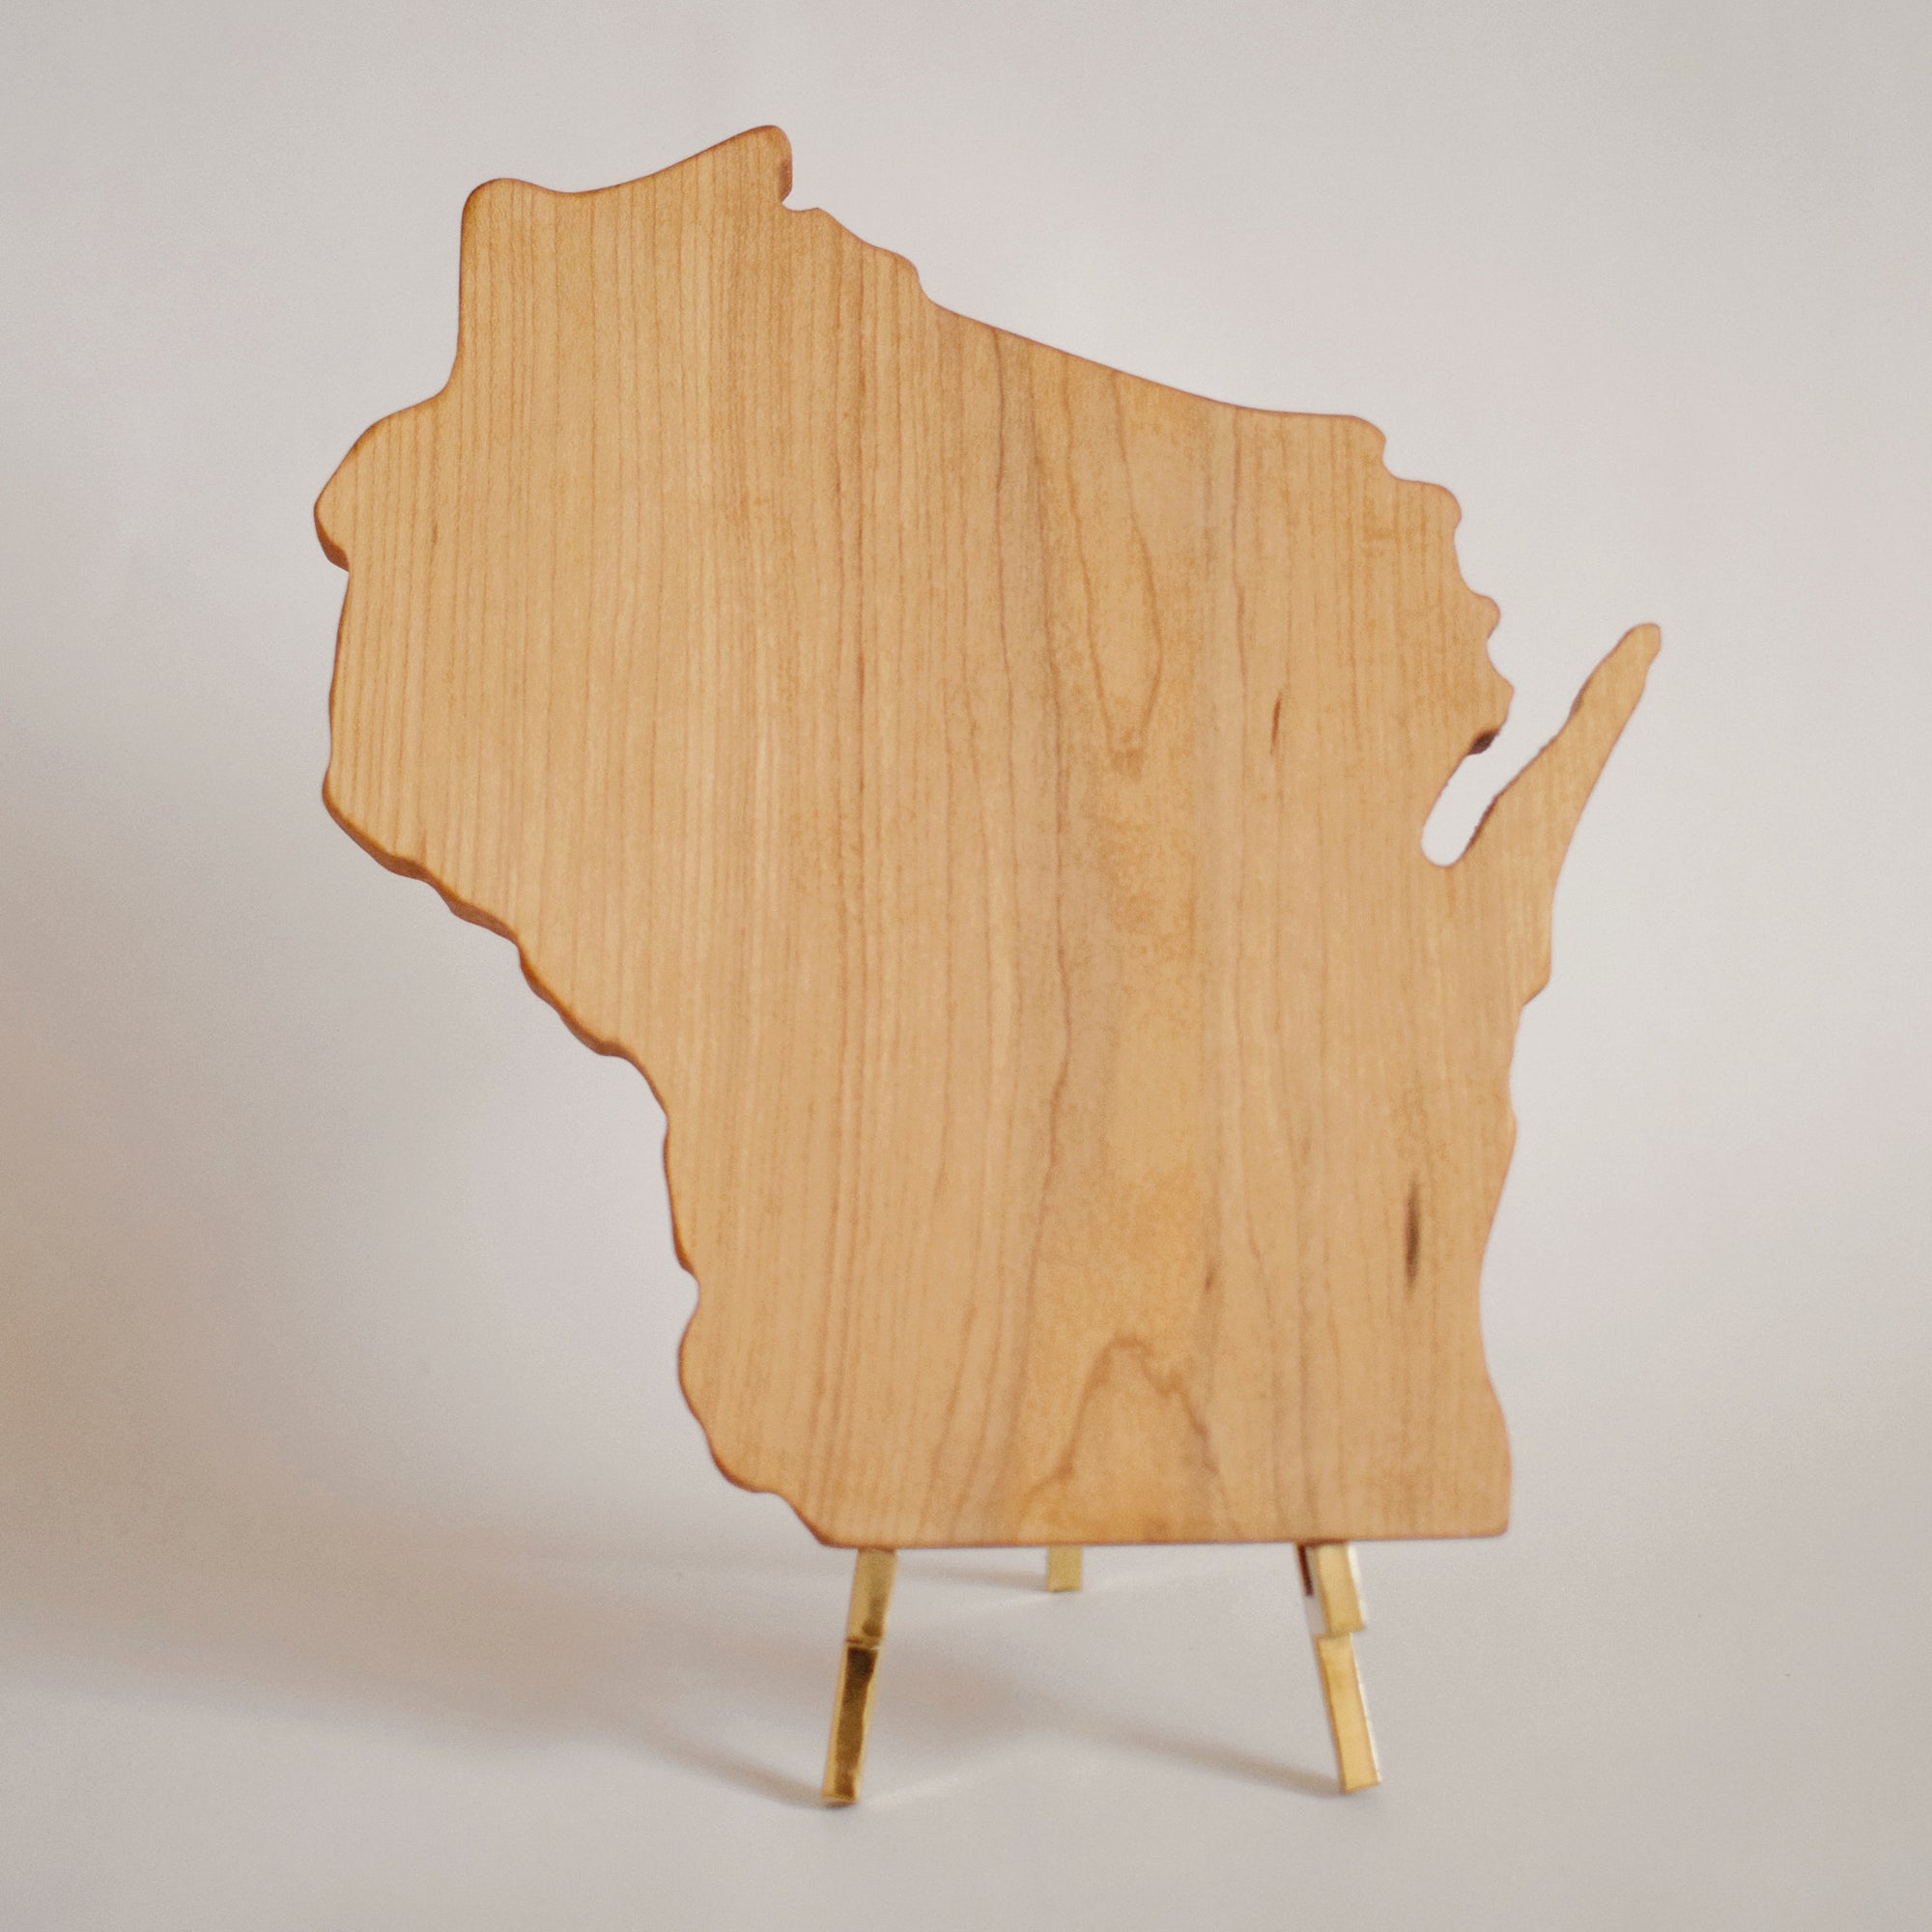 Thrifted Goods - Wisconsin Cutting Board